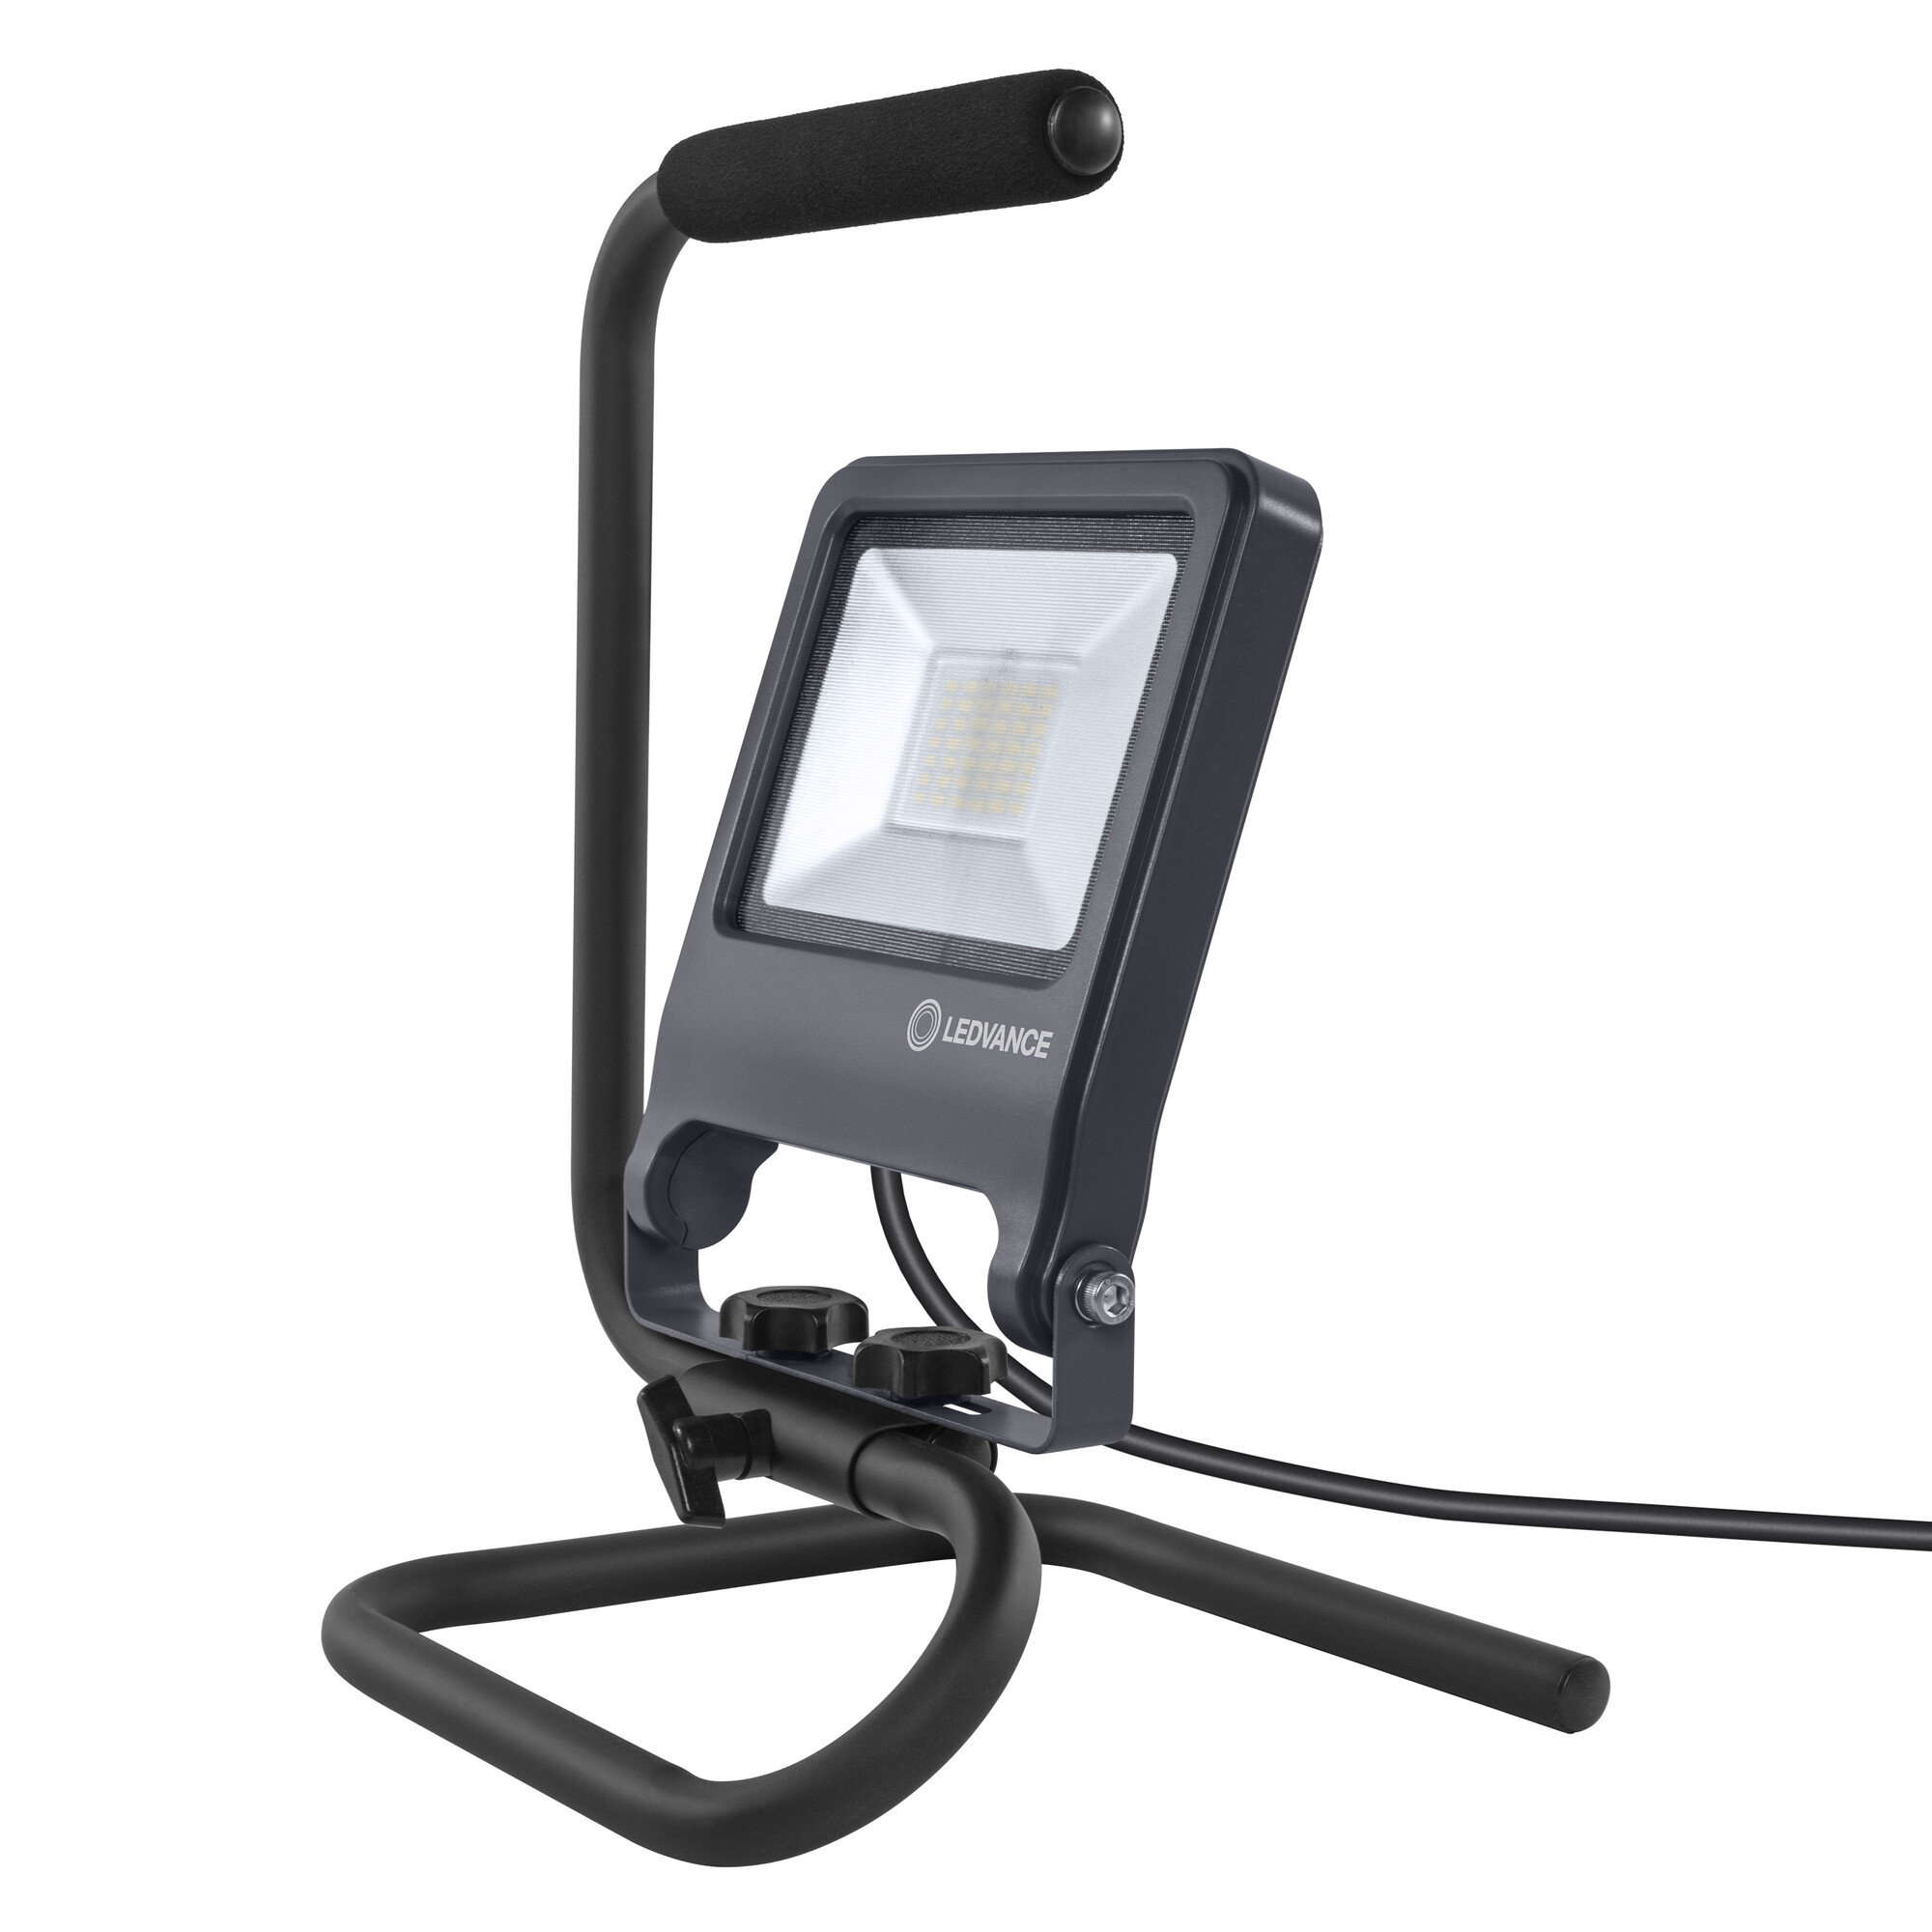 LED-Baustrahler 'Worklights' grau 2700 lm IP 65 + product picture